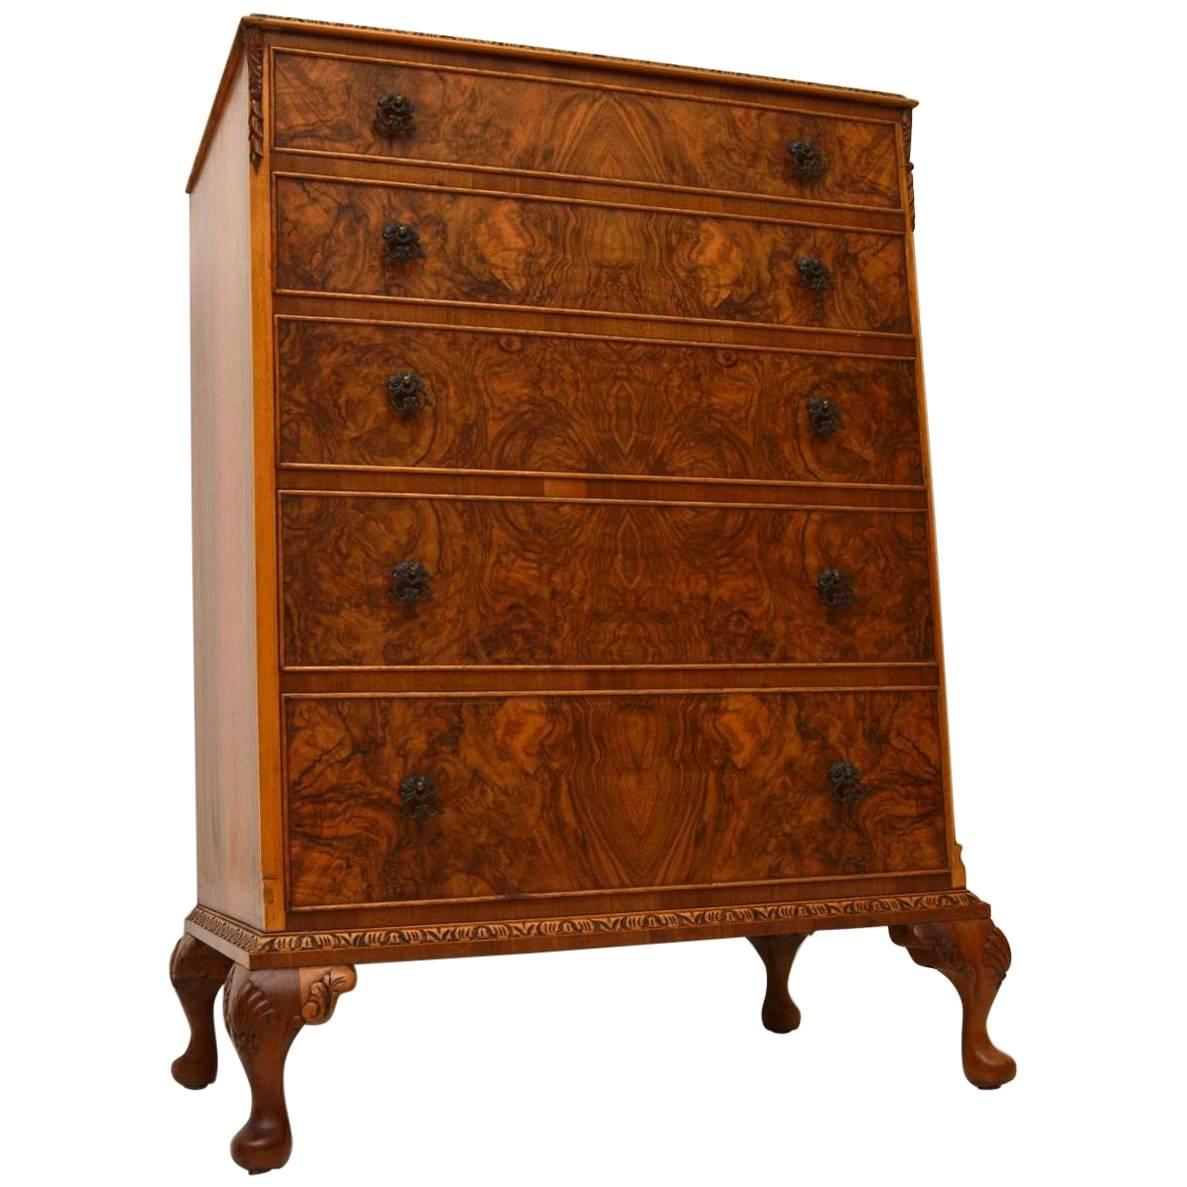 Antique Burr Walnut Queen Anne Style Chest of Drawers